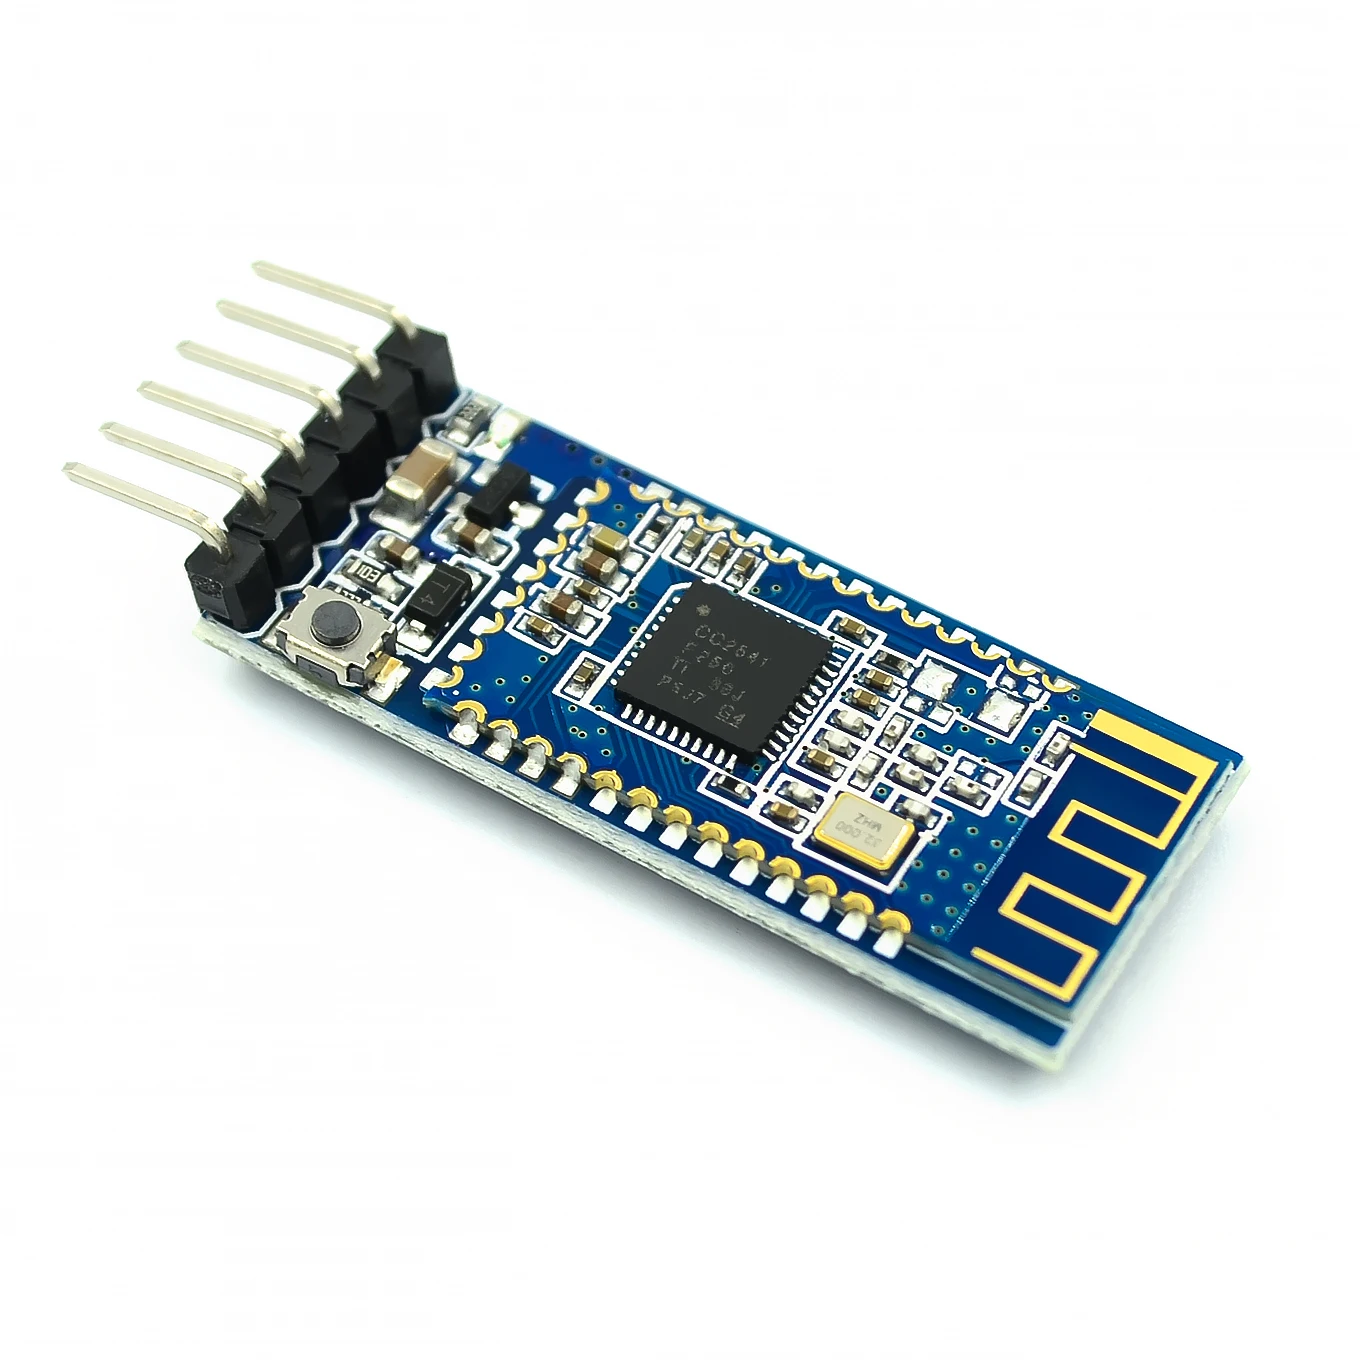 

AT-09 !!!Android IOS HM-10 BLE Bluetooth 4.0 CC2540 CC2541 Serial Wireless Module